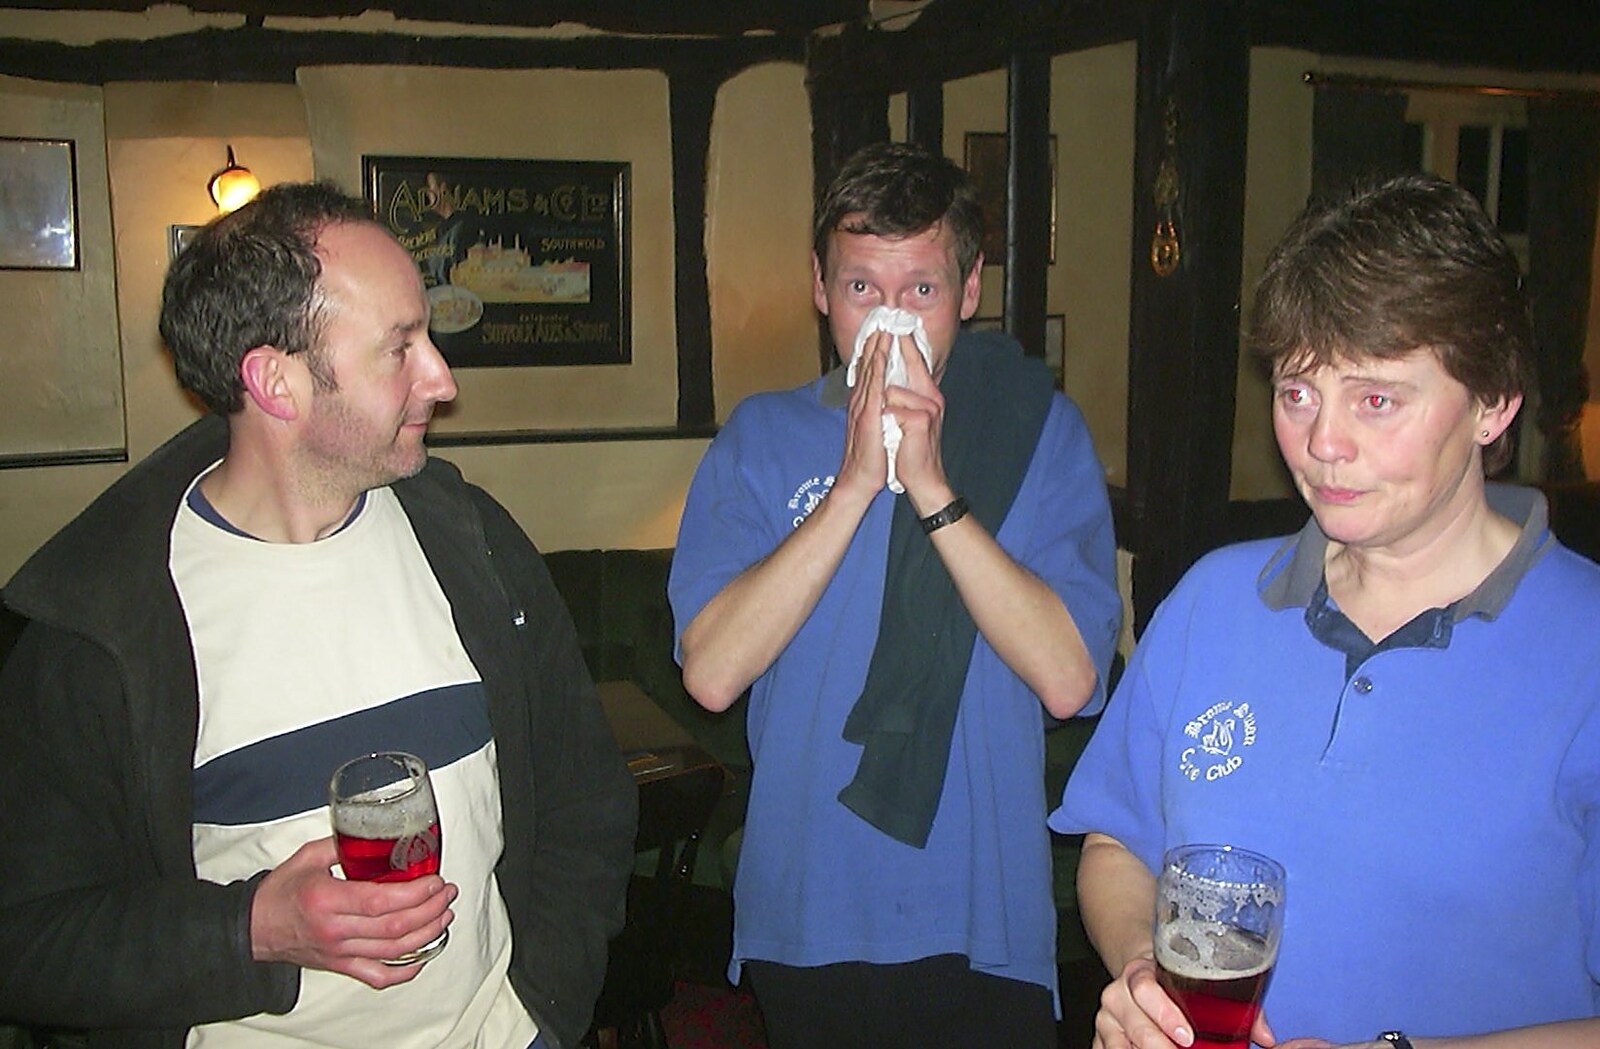 Wednesday and Thursday: The BSCC Season Opens, and Stuff Happens, Suffolk - 9th April 2004: Over in the Needham Red Lion, Apple blows his nose